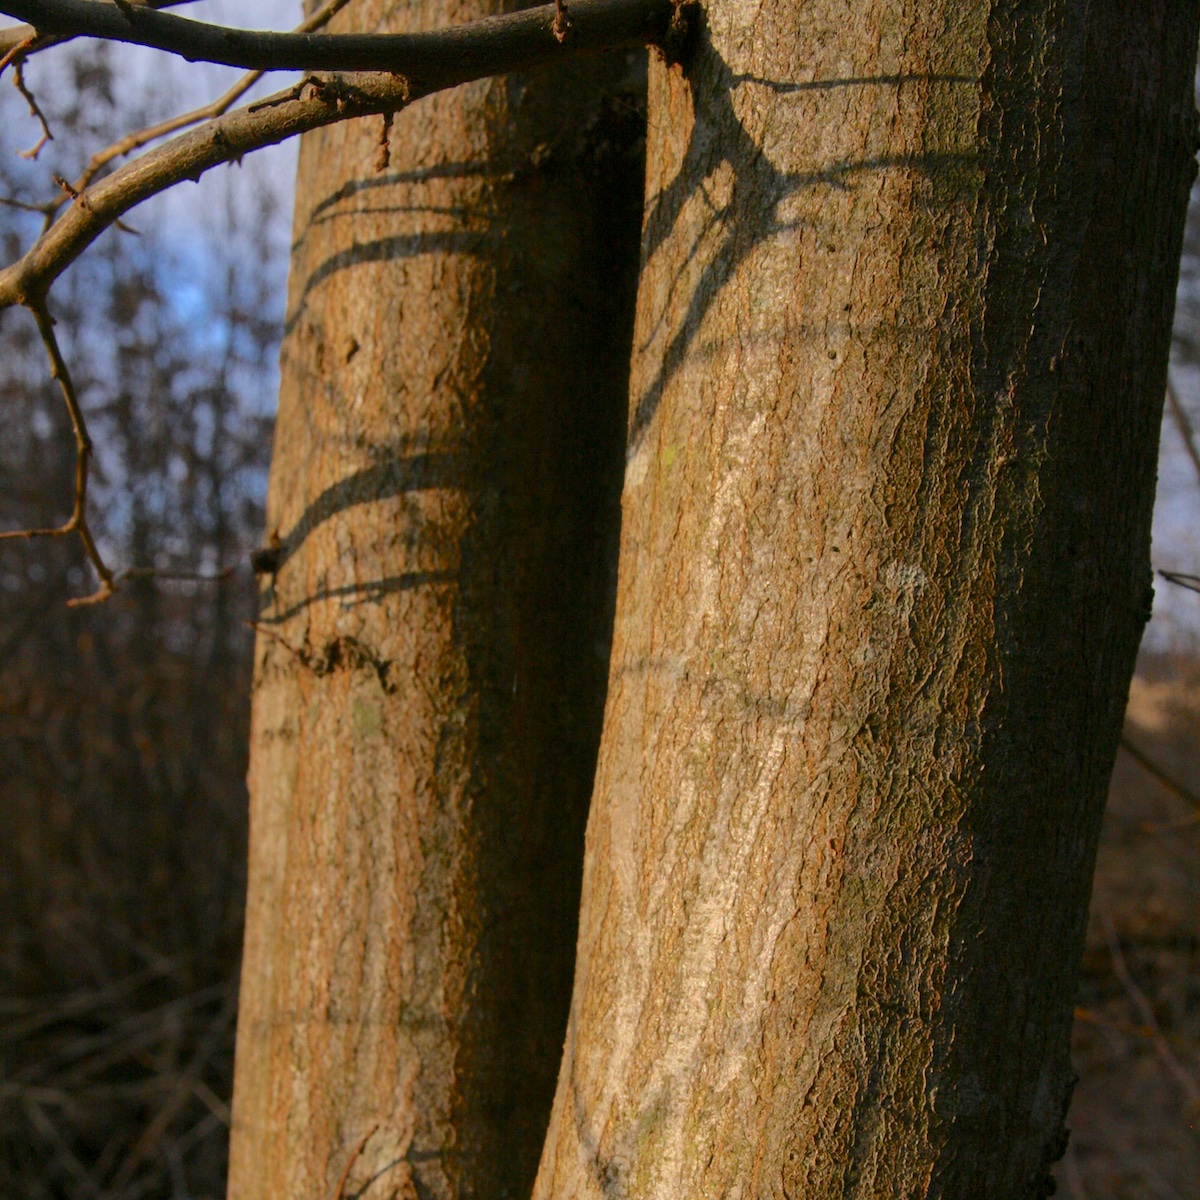 Bark of hornbeam trees showing striations and ripples that give them their common name of 'musclewood.'